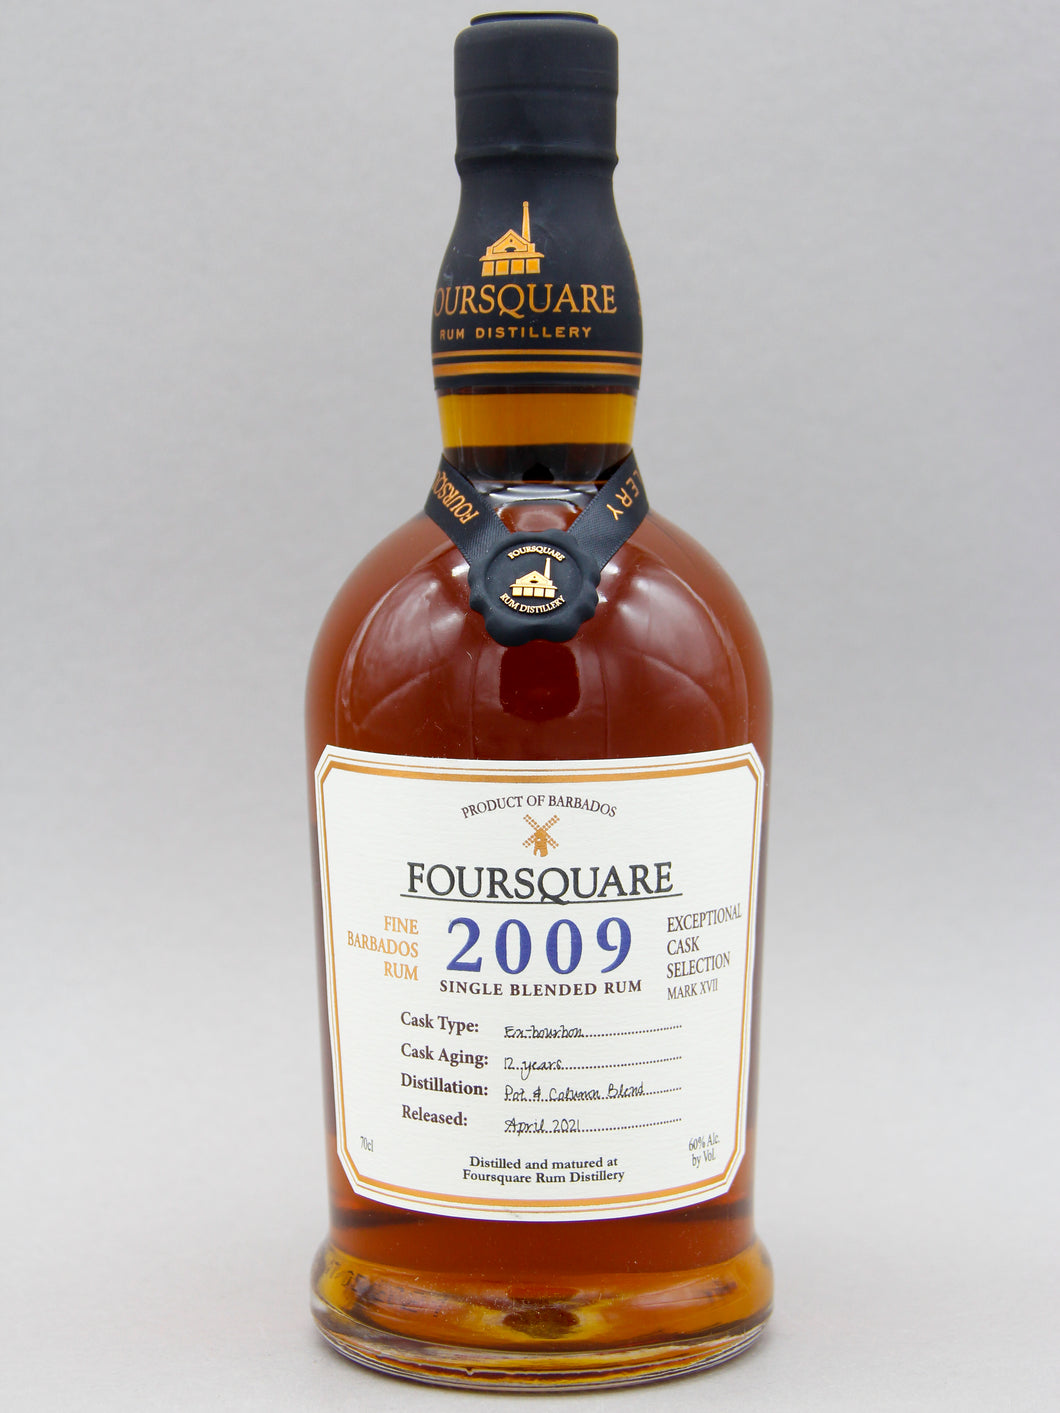 Foursquare Exceptional Cask Selection: 2009, Single Blended Rum, 12 Years, Barbados (60%, 70cl)